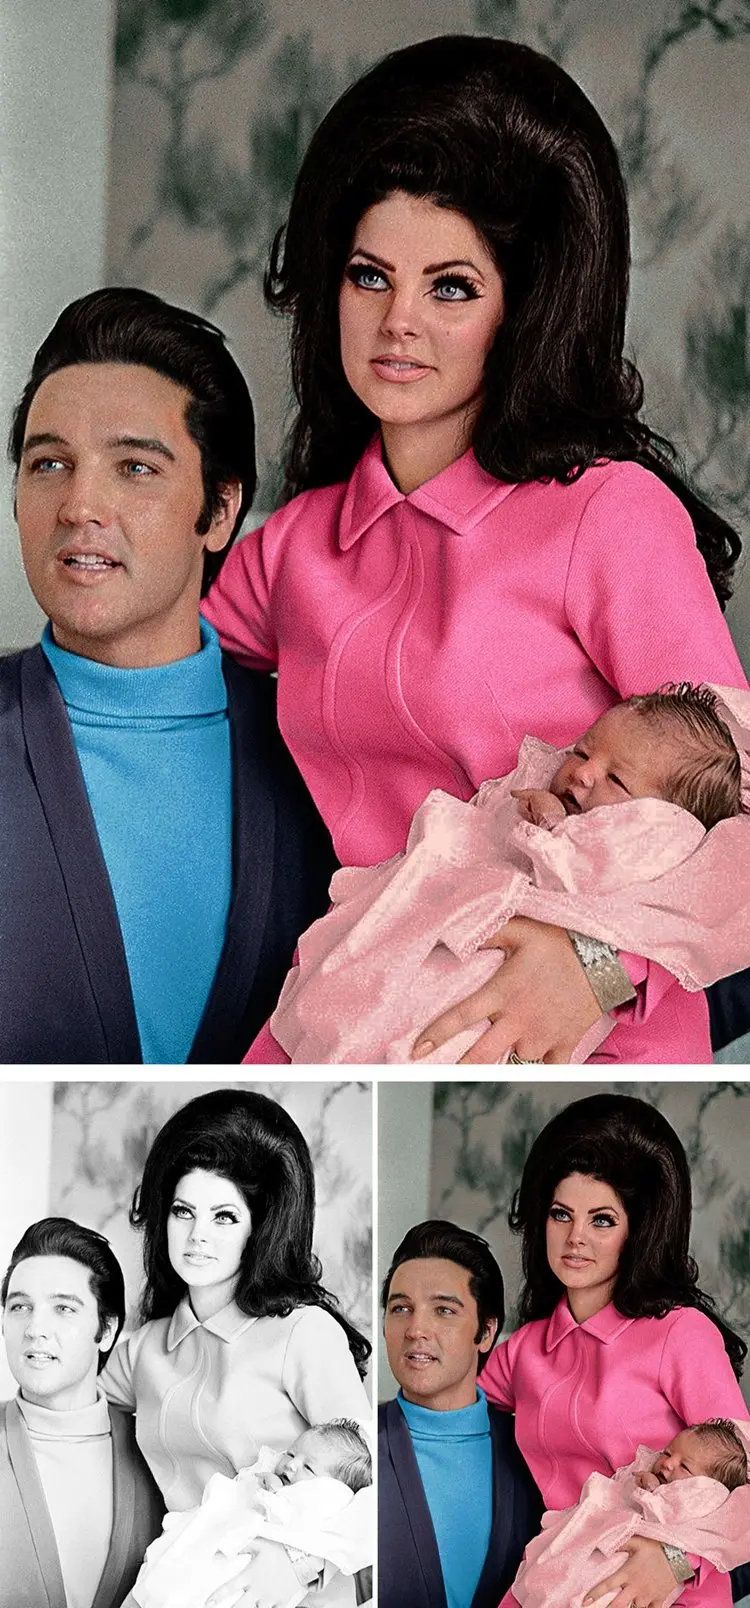 colorized-black-and-white-historic-photos-elvis